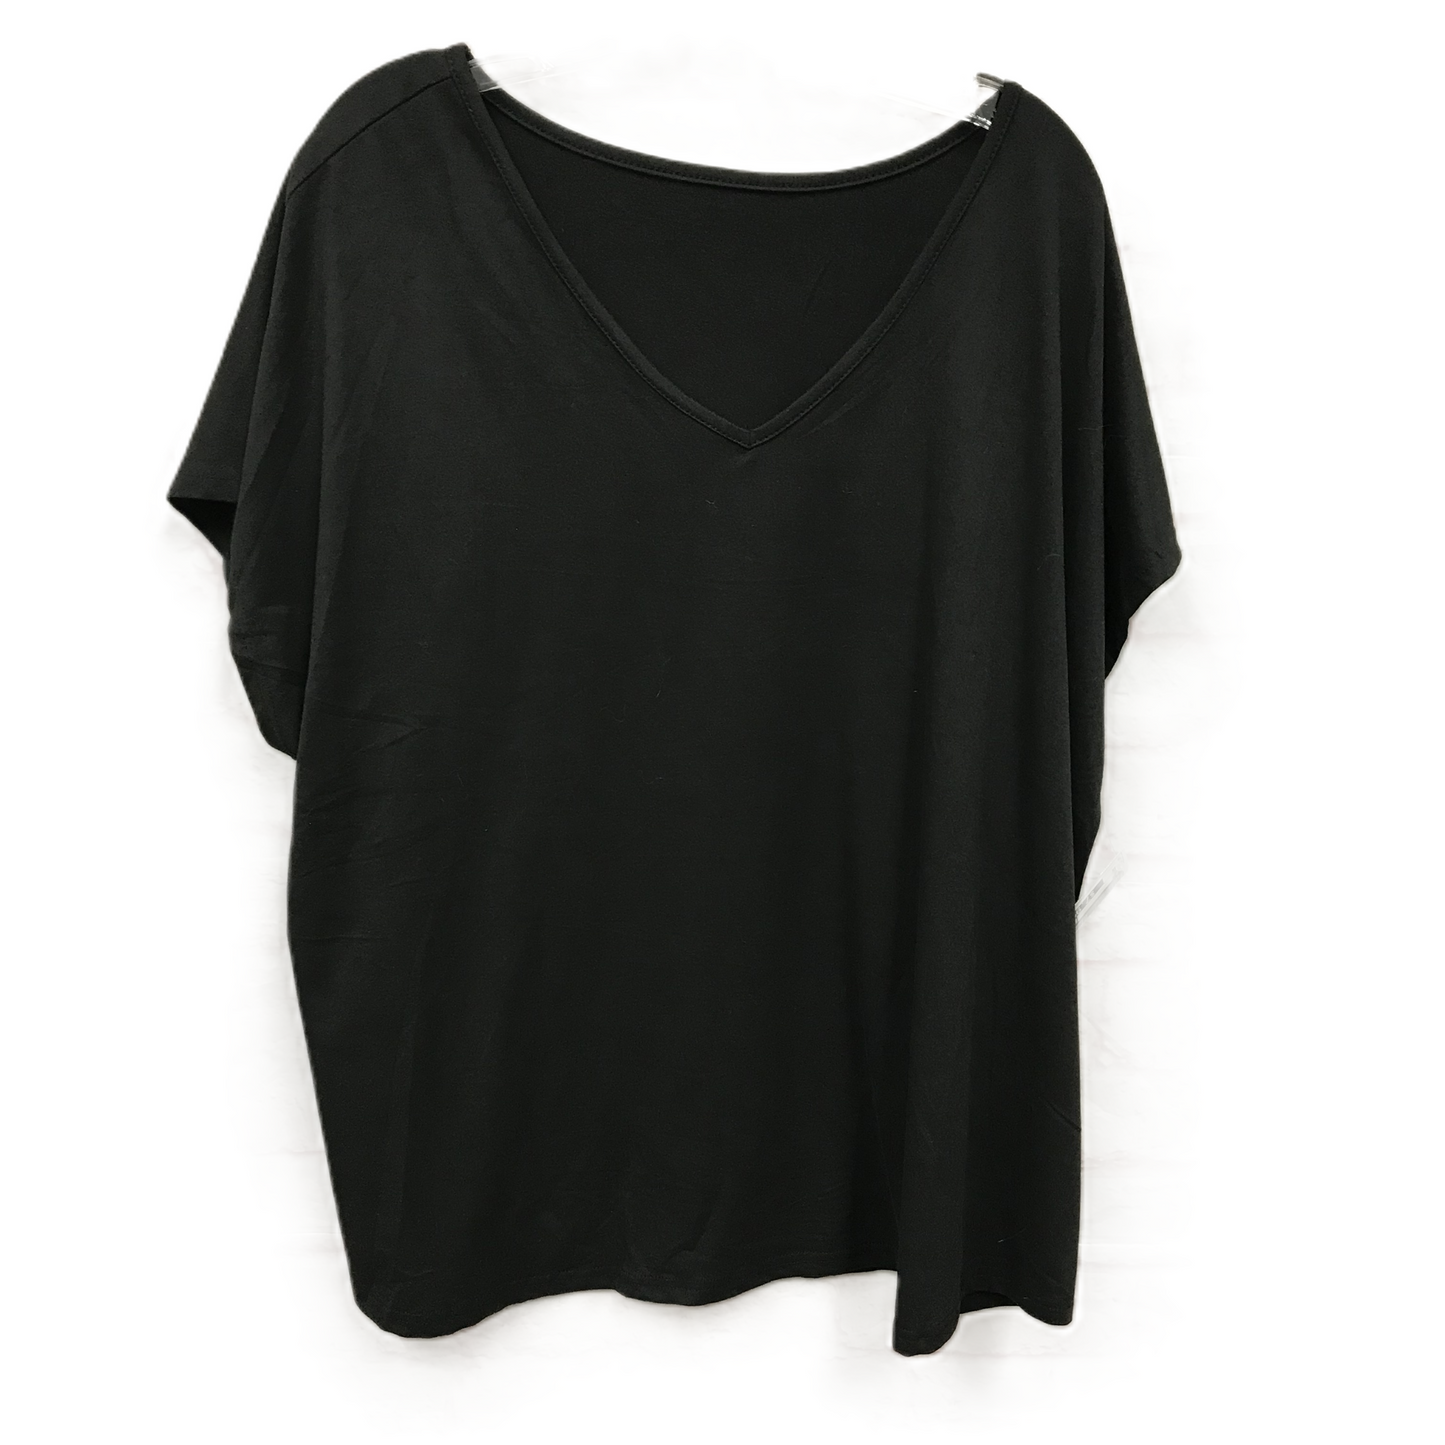 Black Top Short Sleeve By Shein, Size: 3x